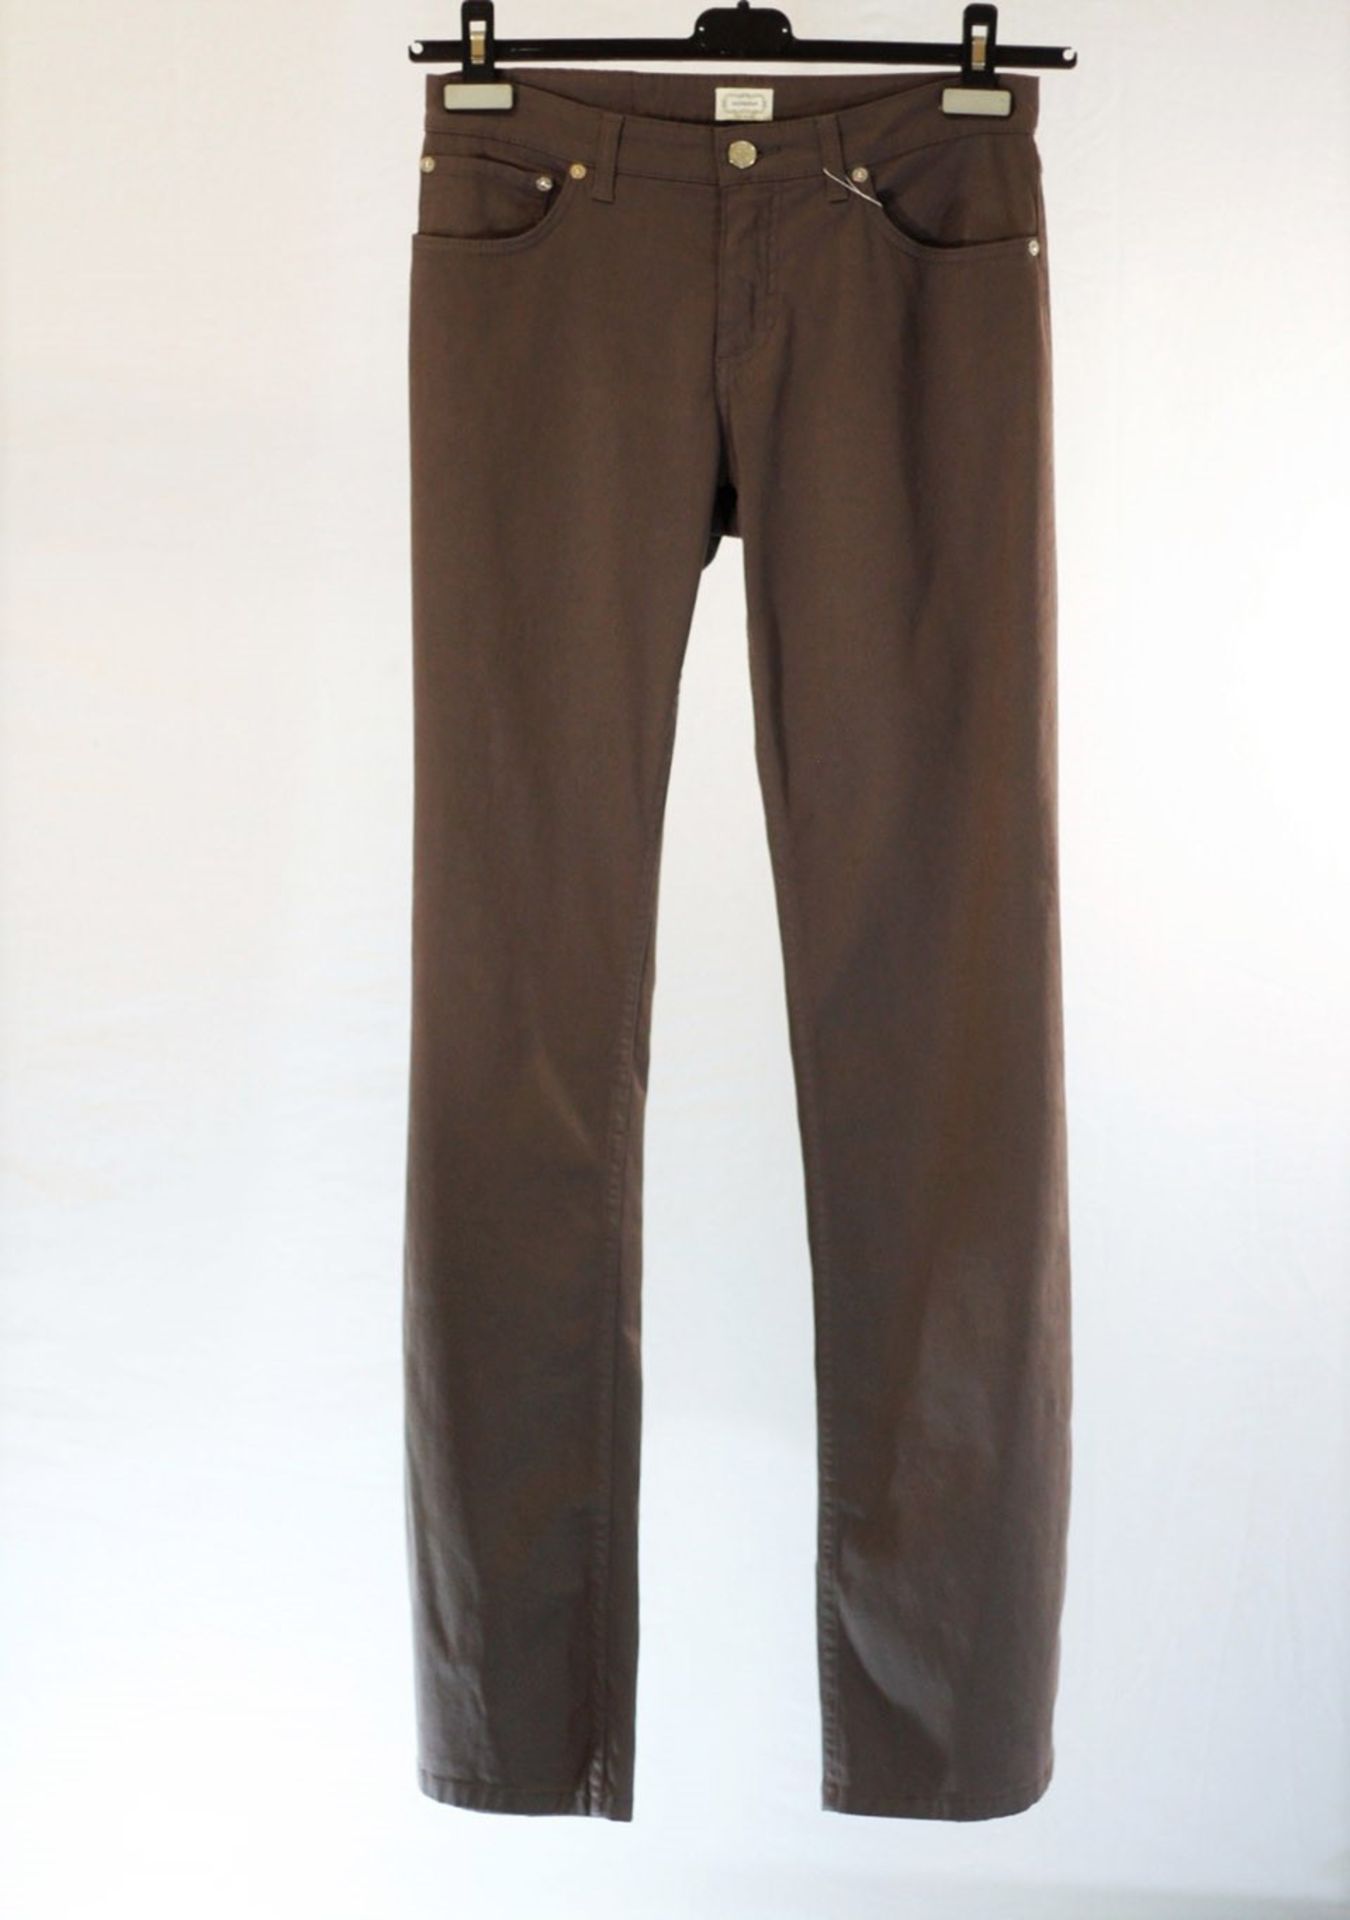 1 x Agnona Brown Jeans - Size: 12 - Material: 98% Cotton, 2% Elastane. Lining 100% Cotton - From a